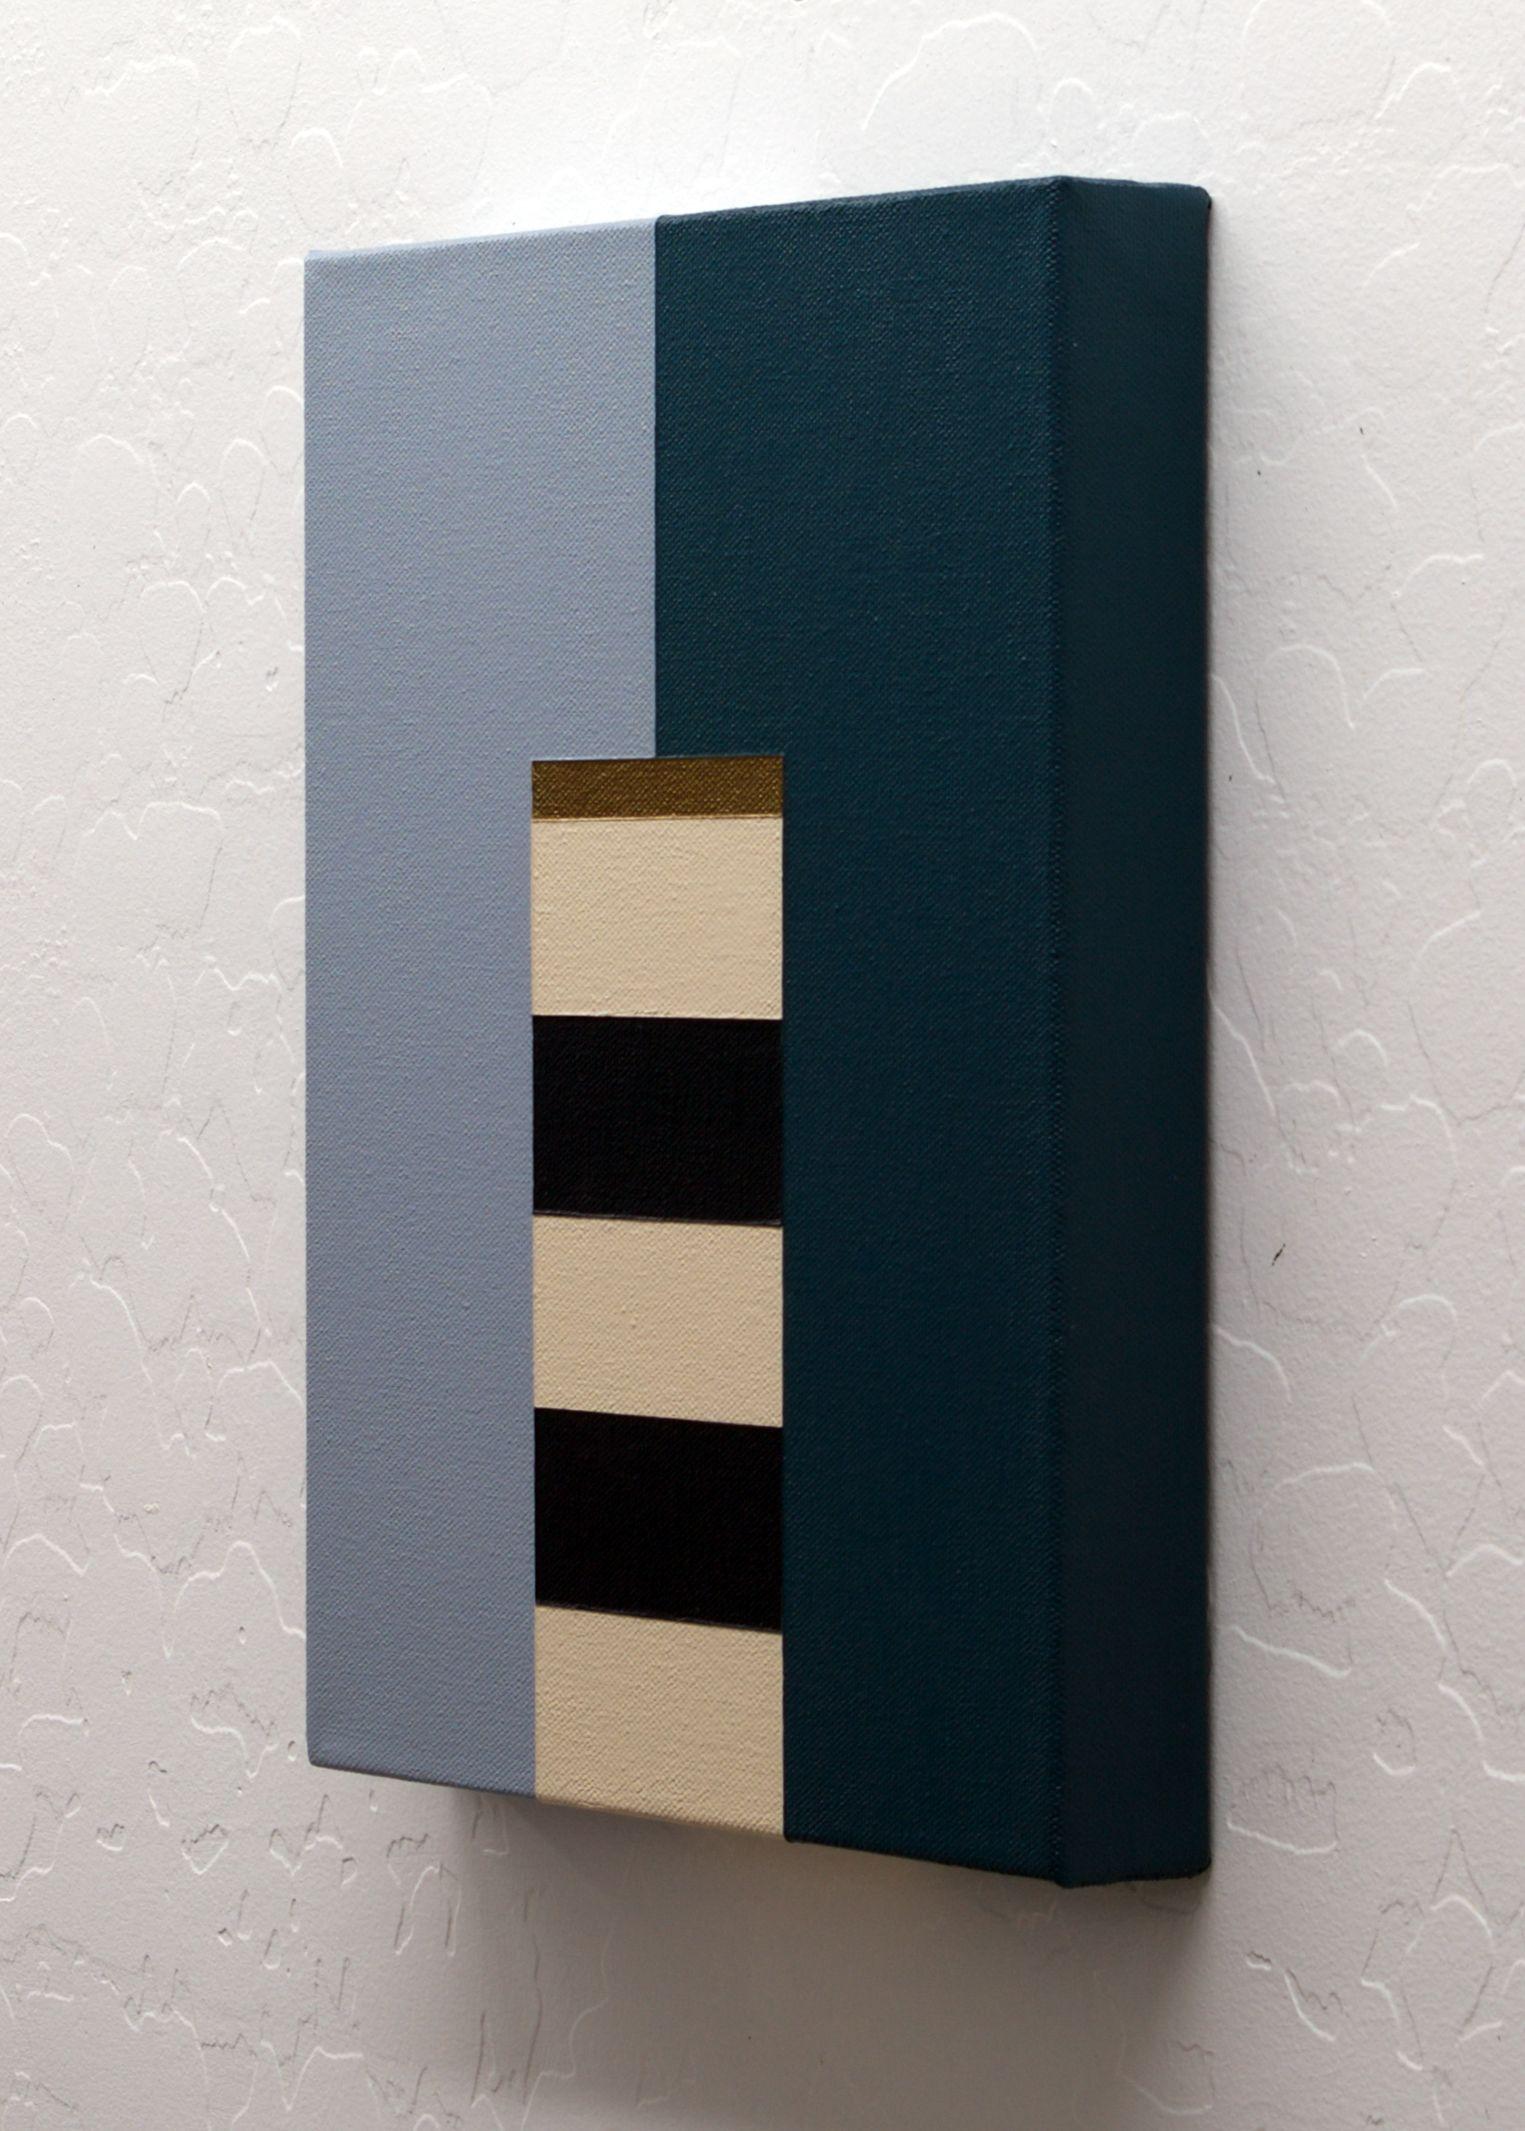 TITLE: GRANADA - Modernist Geometric / Minimalist Abstract Painting  MATERIALS: Acrylic Paint / Stretched Canvas  SIZE: 12 x 9 x 1.5 Inches Deep Gallery Wrapped Canvas    DETAILS: The 4 Sides have no staples and are continuation painted from the